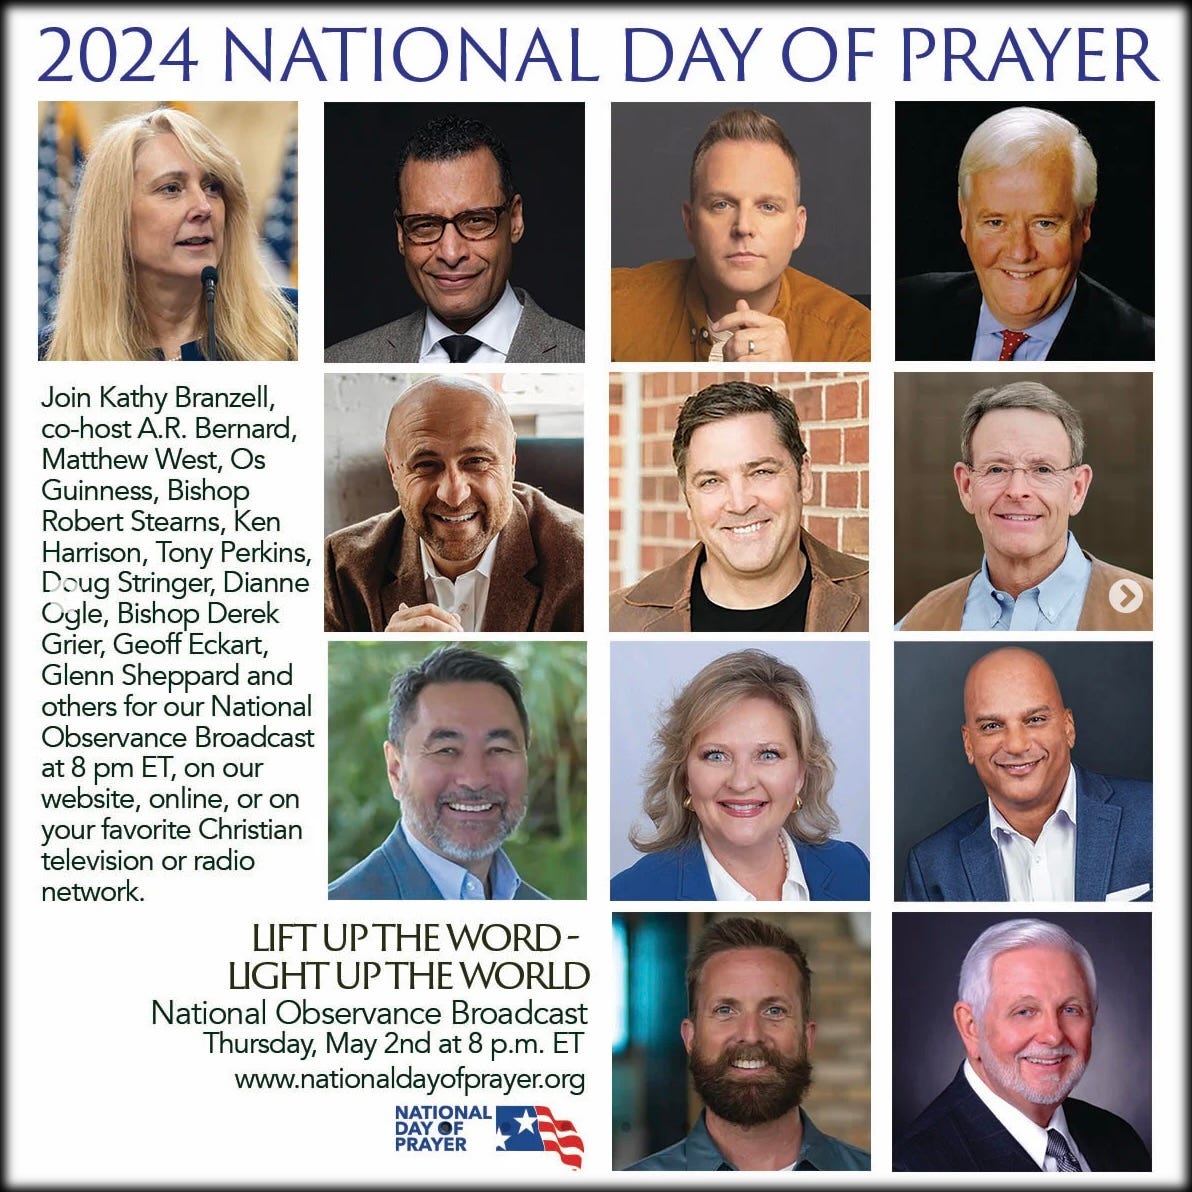 Image of 2024 National Day Of Prayer National Observance Broadcast Poster.